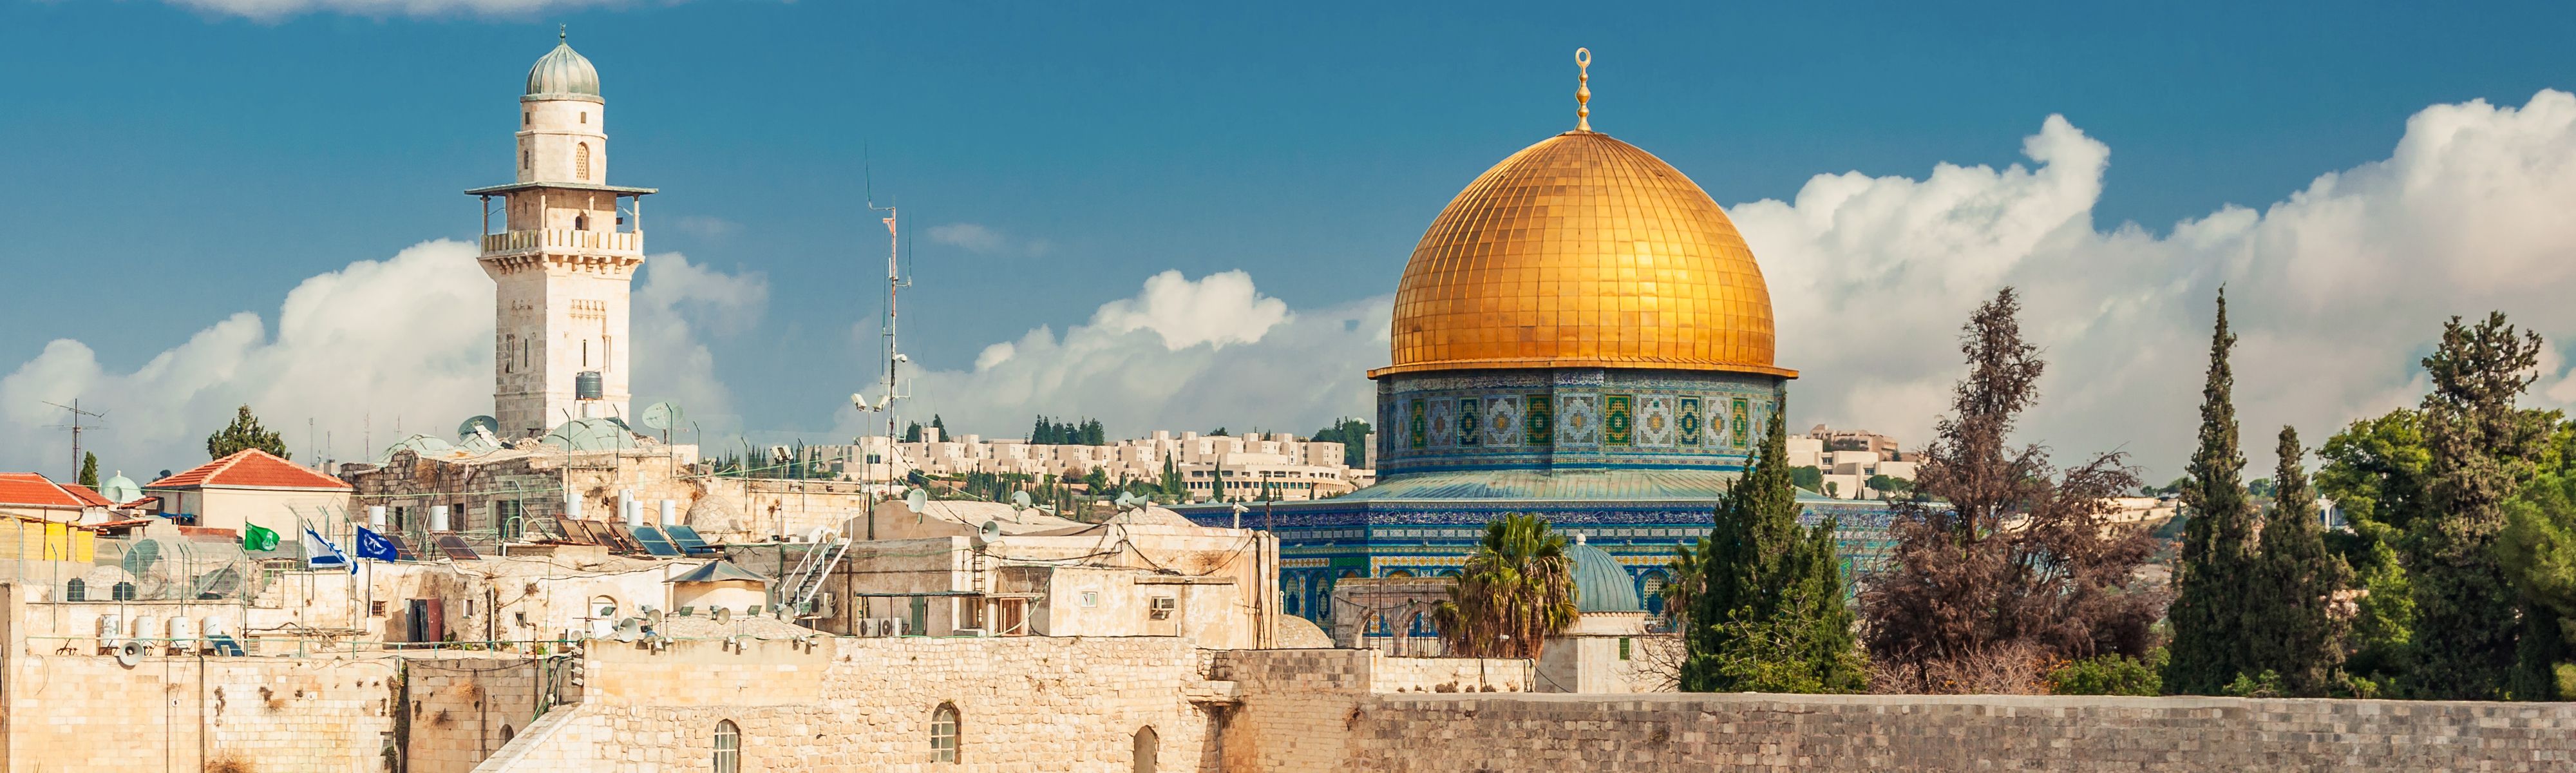 gold domed and blue tiled temple mount in jerusalem old city in israel